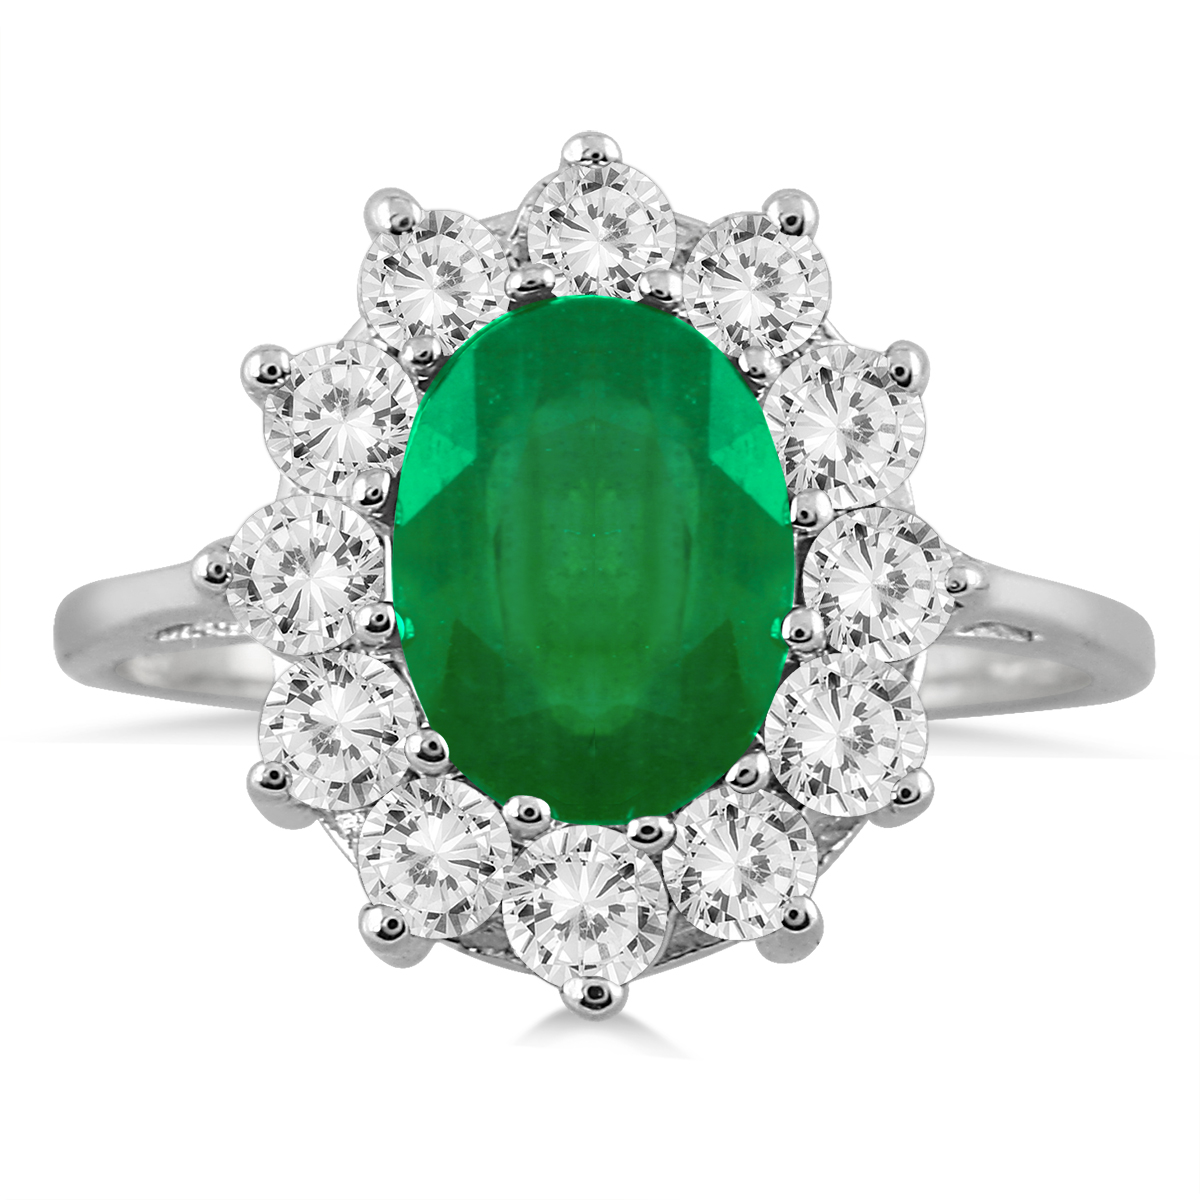 3 Carat TW Diamond and Emerald Ring in 14K White Gold